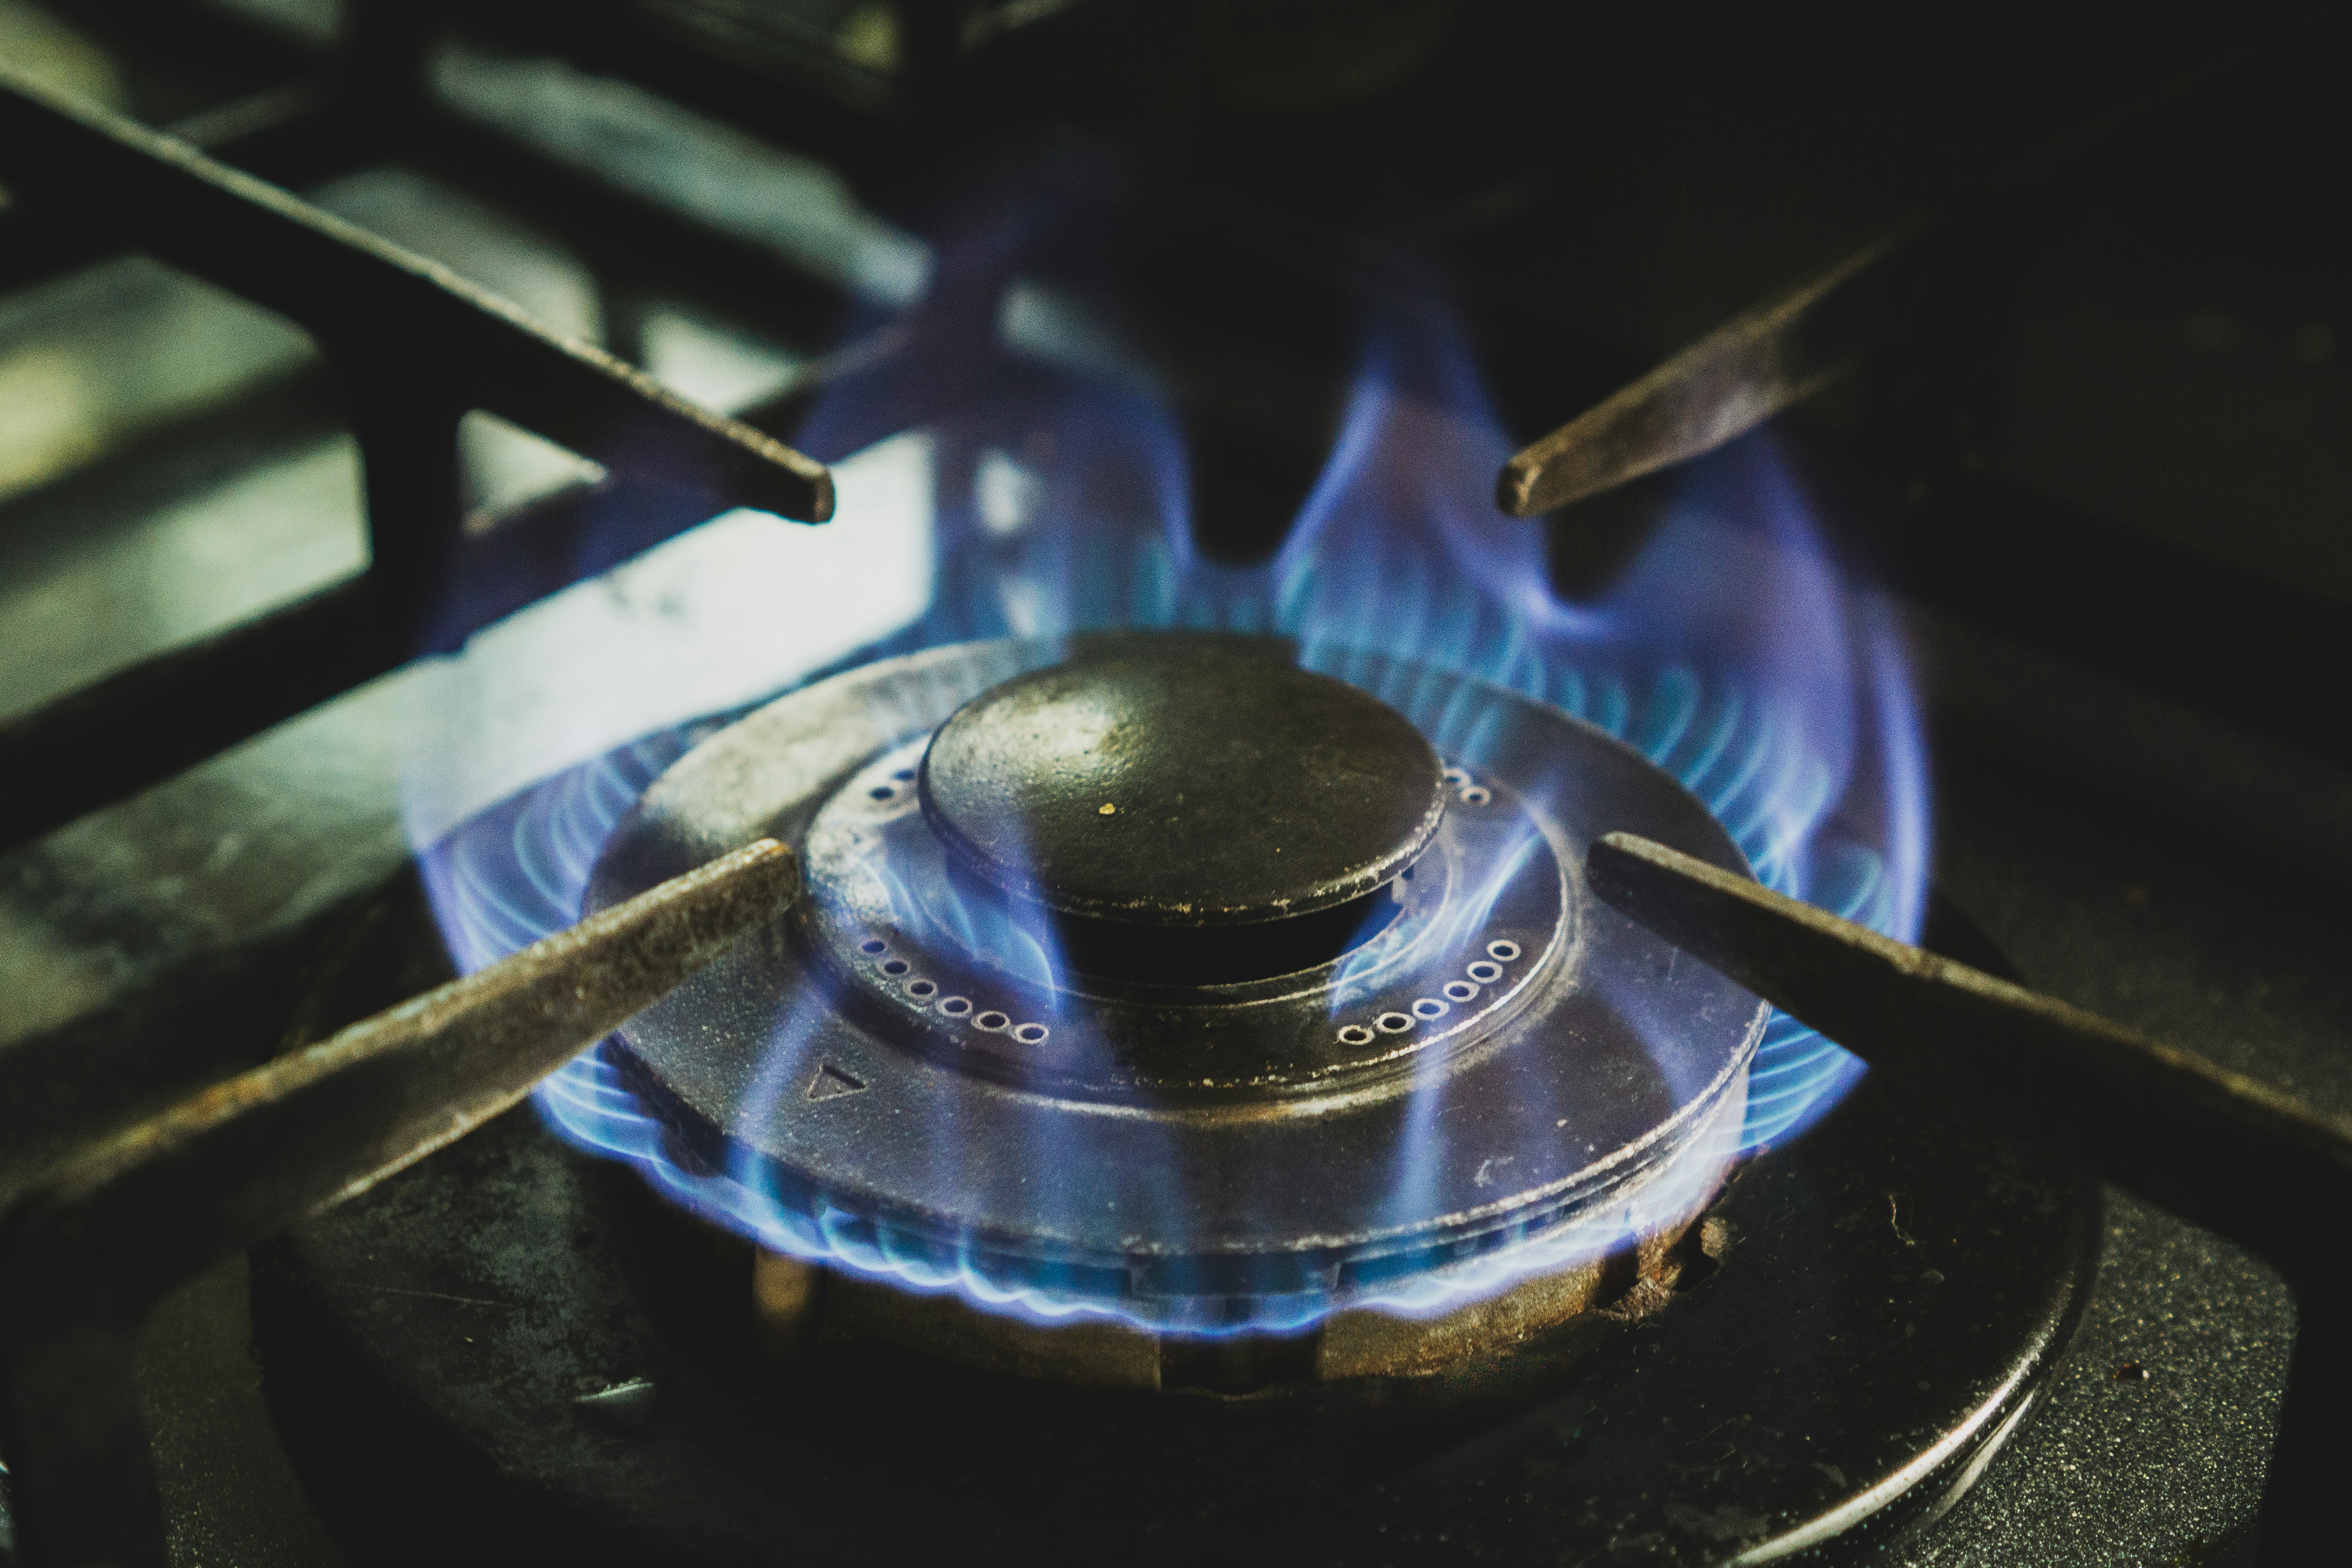 Blue flame on a gas stove in a kitchen.